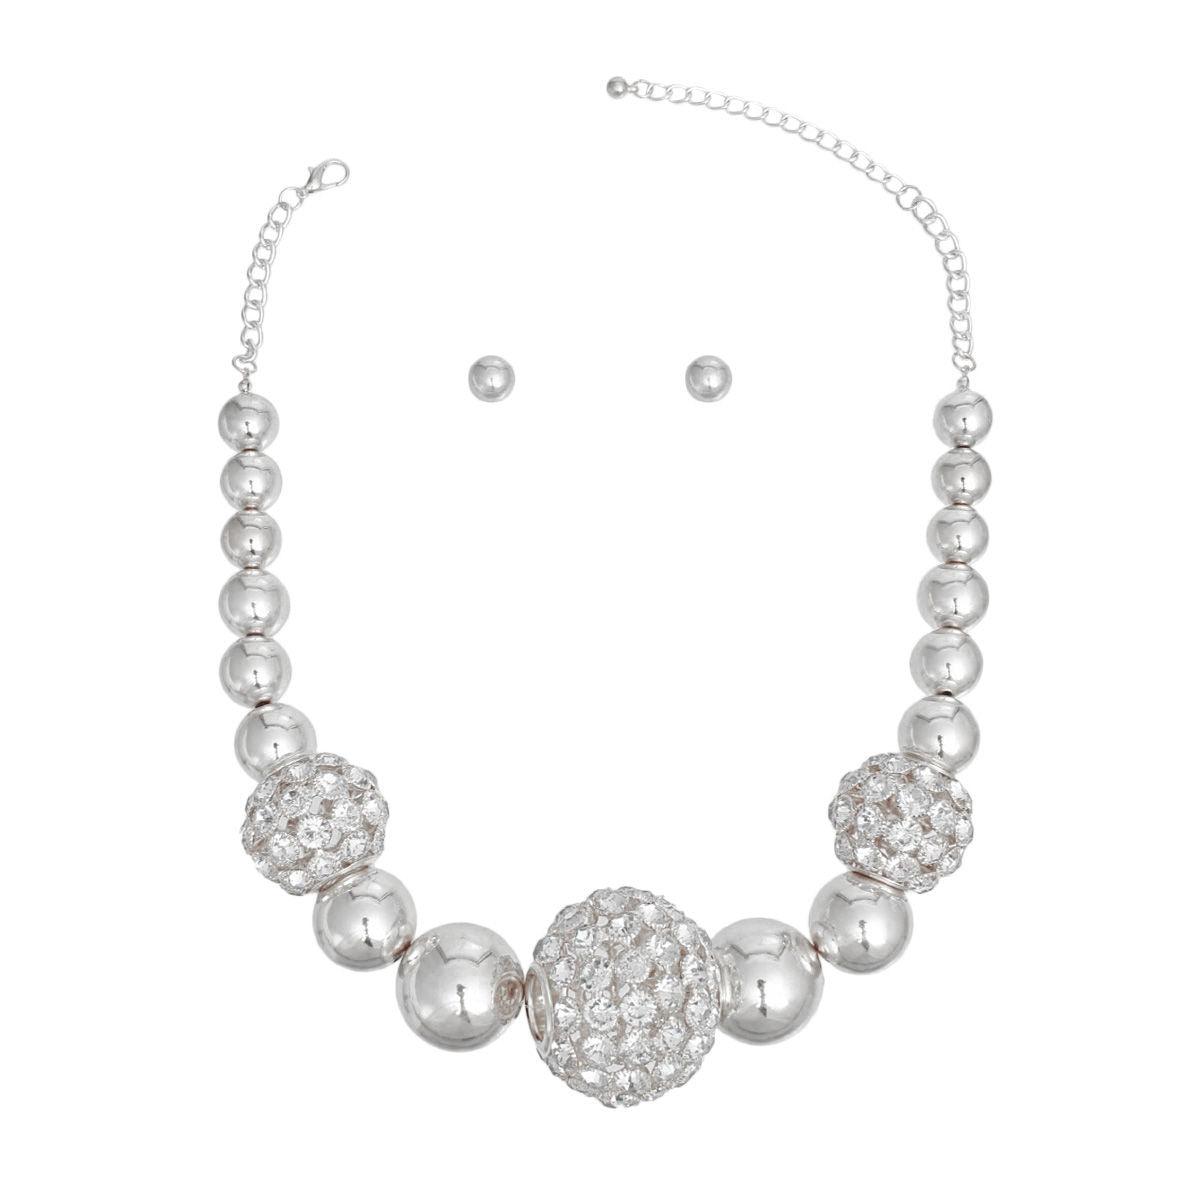 Bold Silver and Beautiful: Beaded Statement Necklace Set for Unforgettable Style